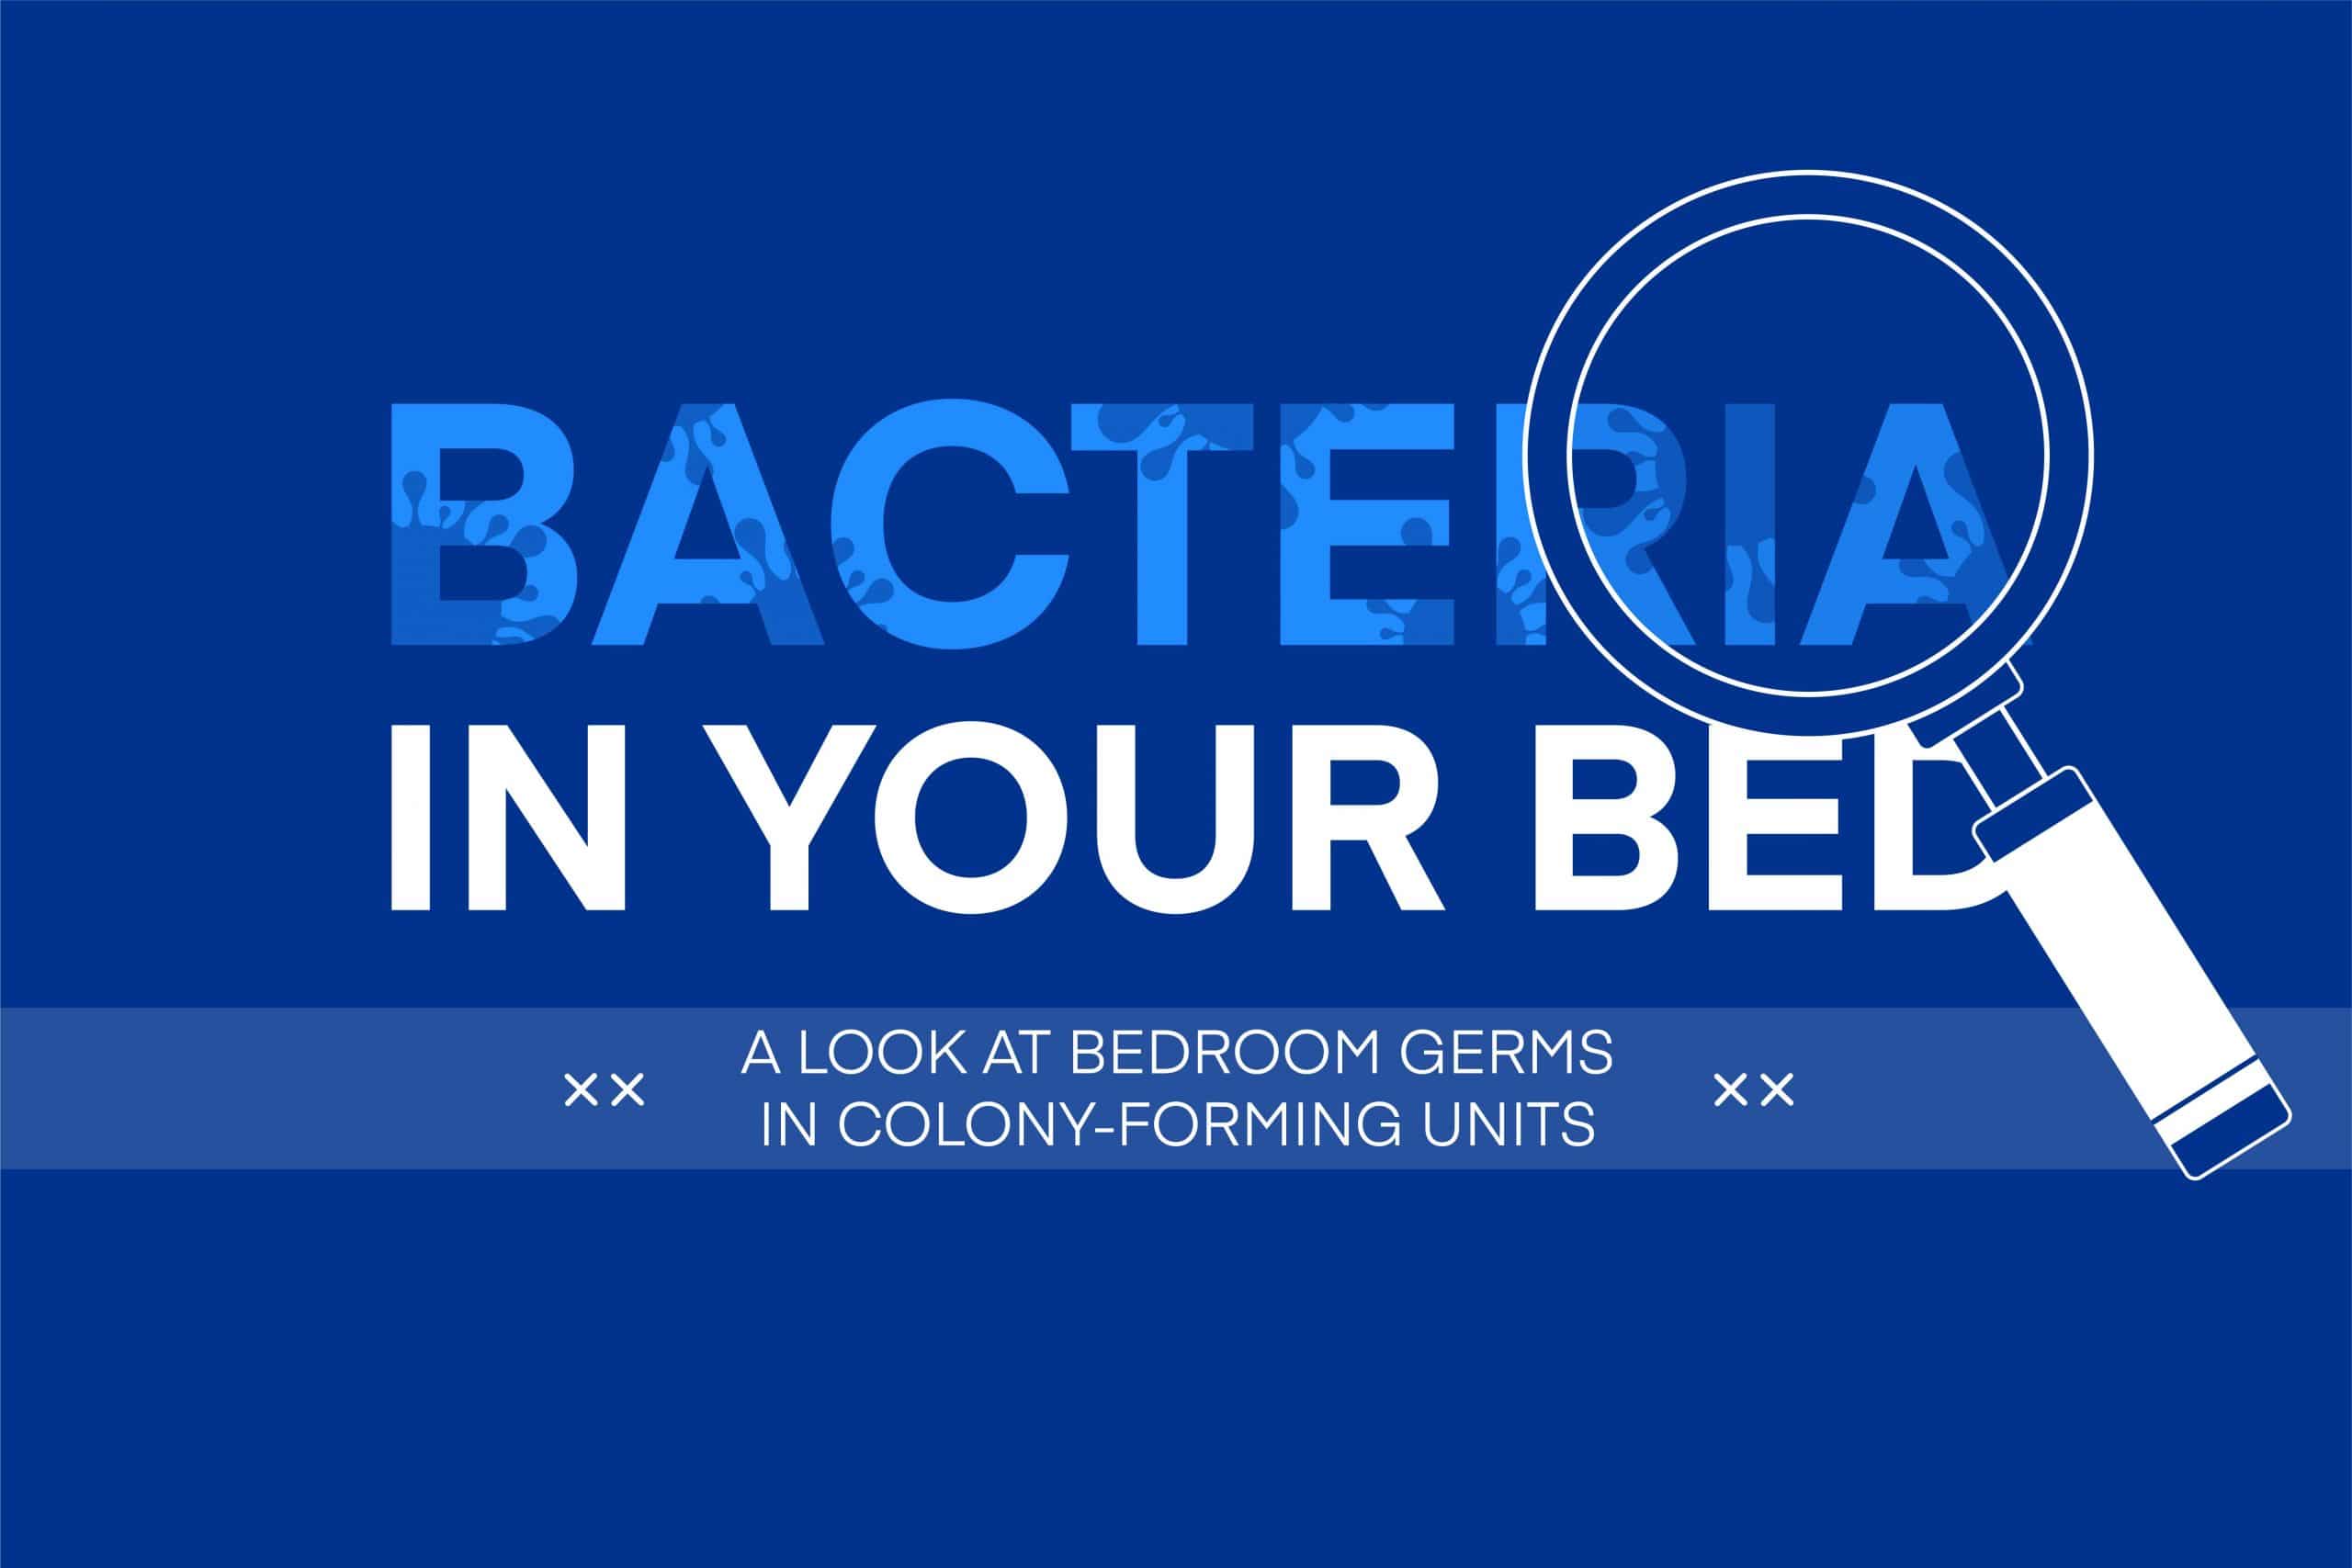 Bacteria in your Bed